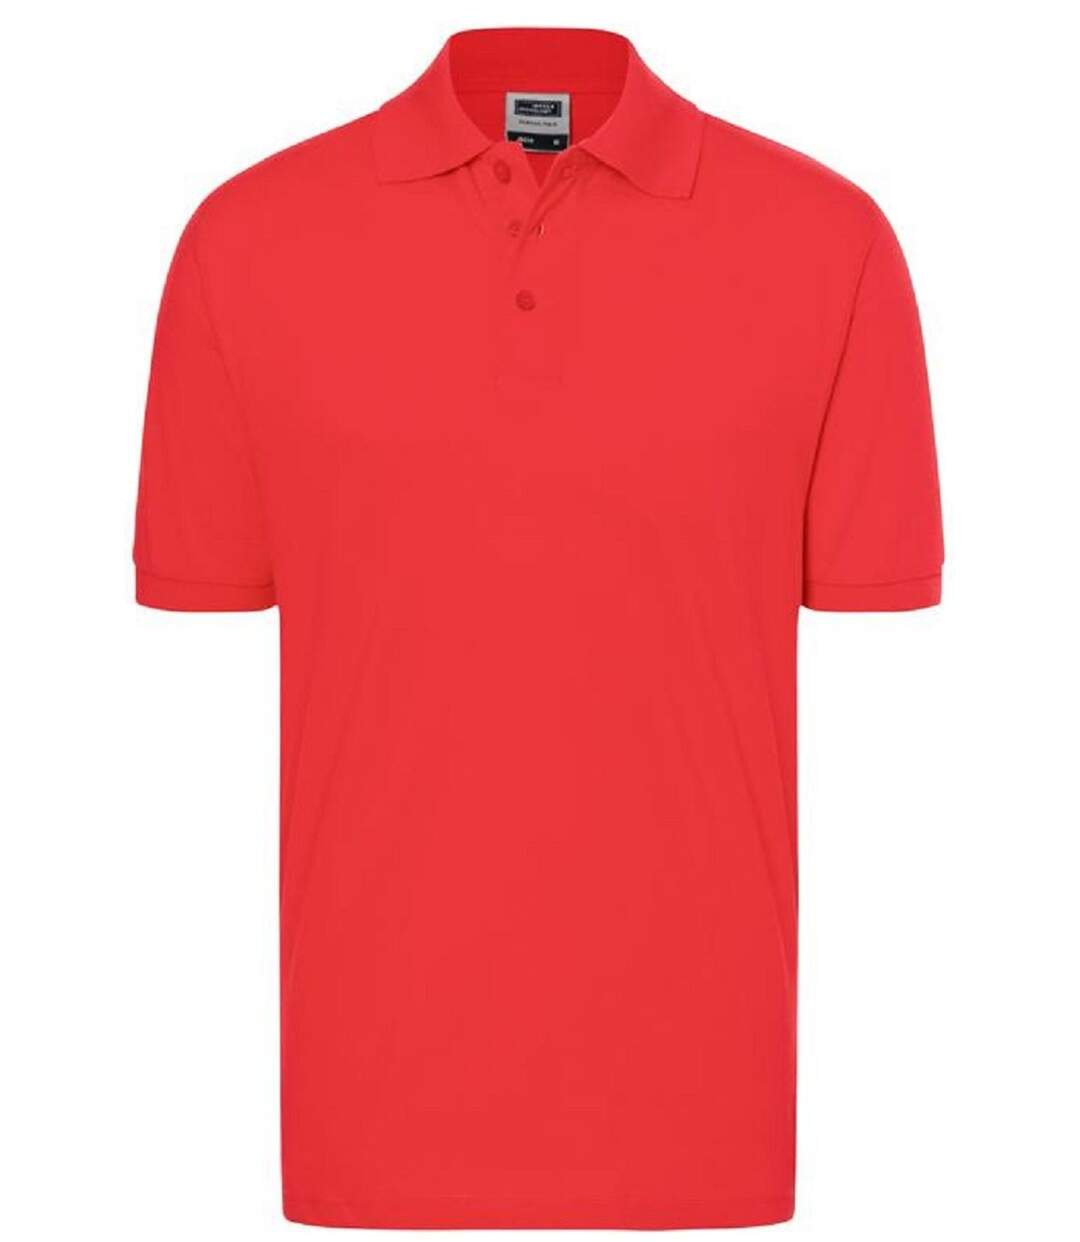 Polo manches courtes - Homme - JN070C - rouge tomate